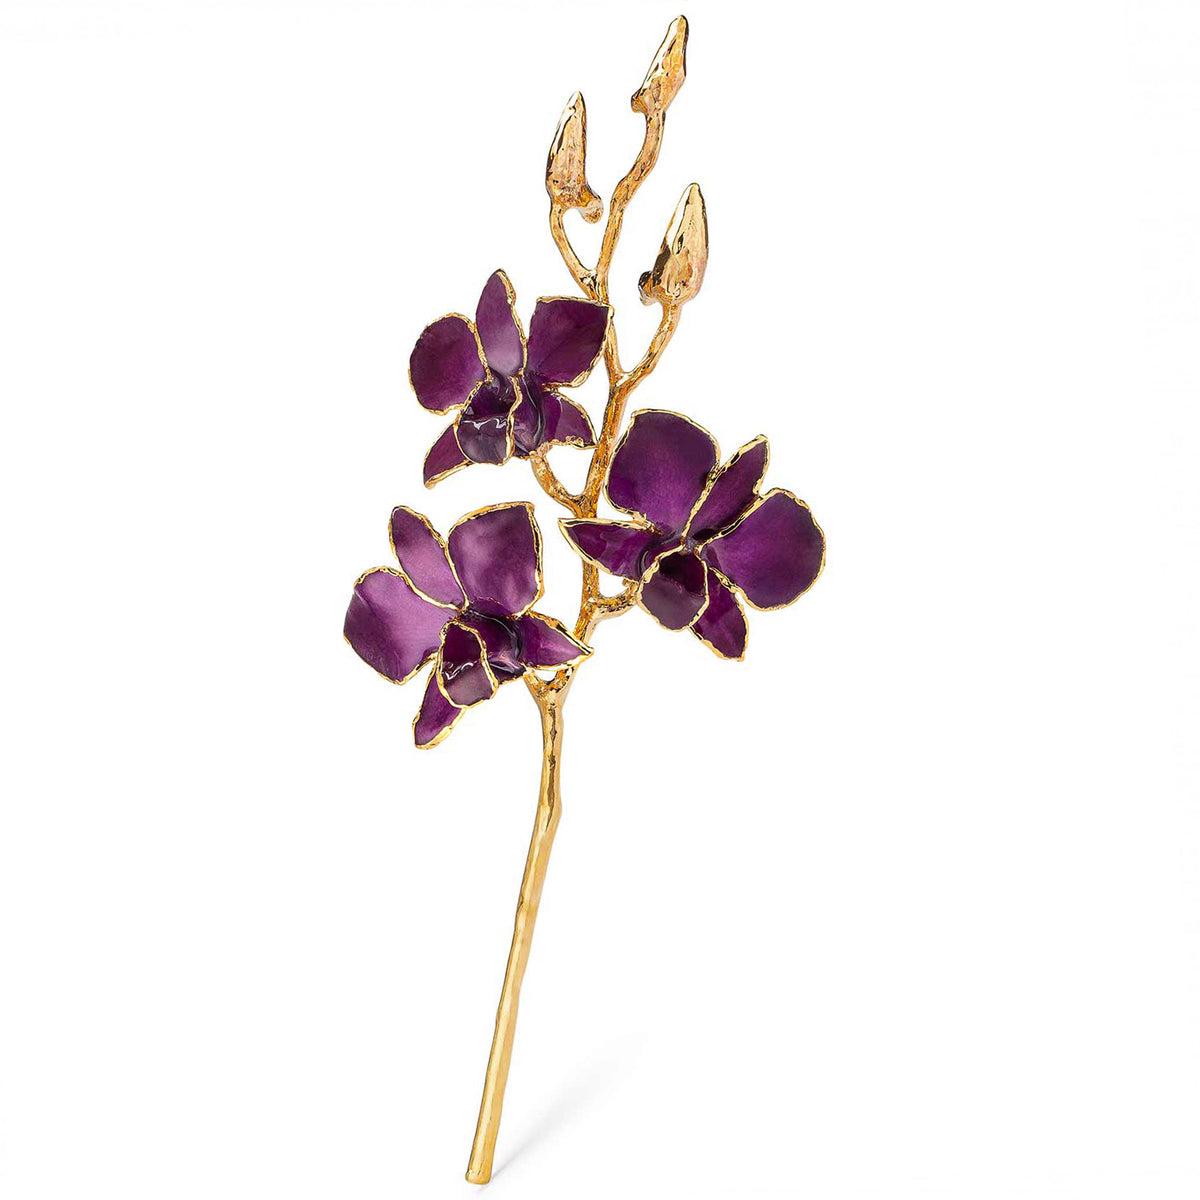 24K Gold Dipped Orchid in Purple view of gold stem and flowers